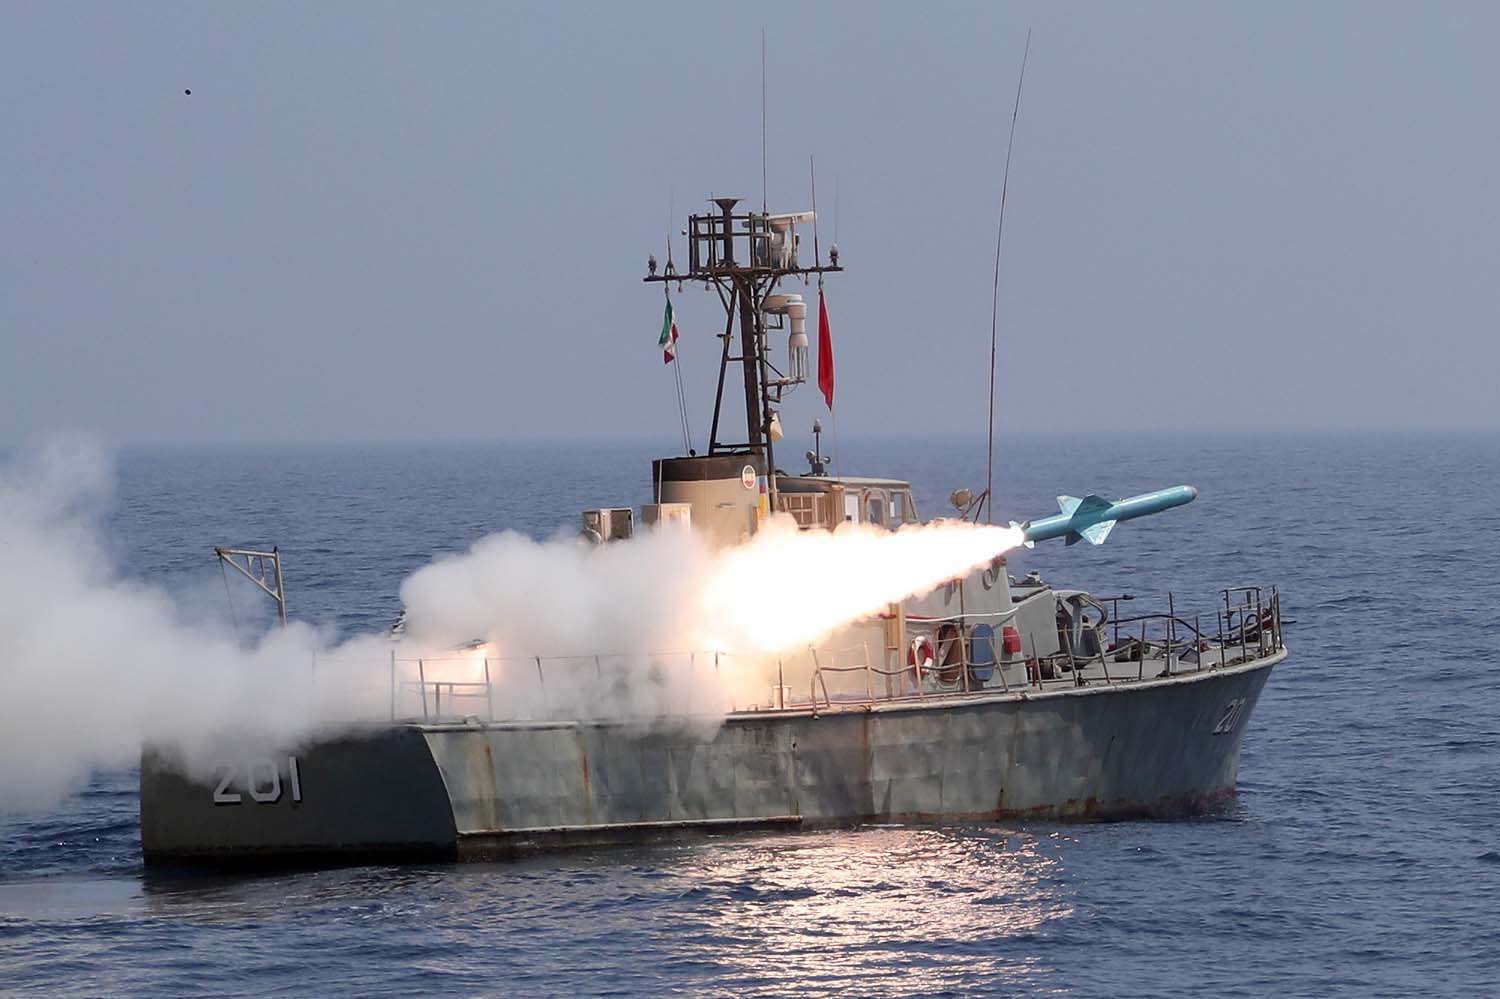 Iranian Nasr missile being fired from a navy warship during the second day of a military exercise in the Gulf last week